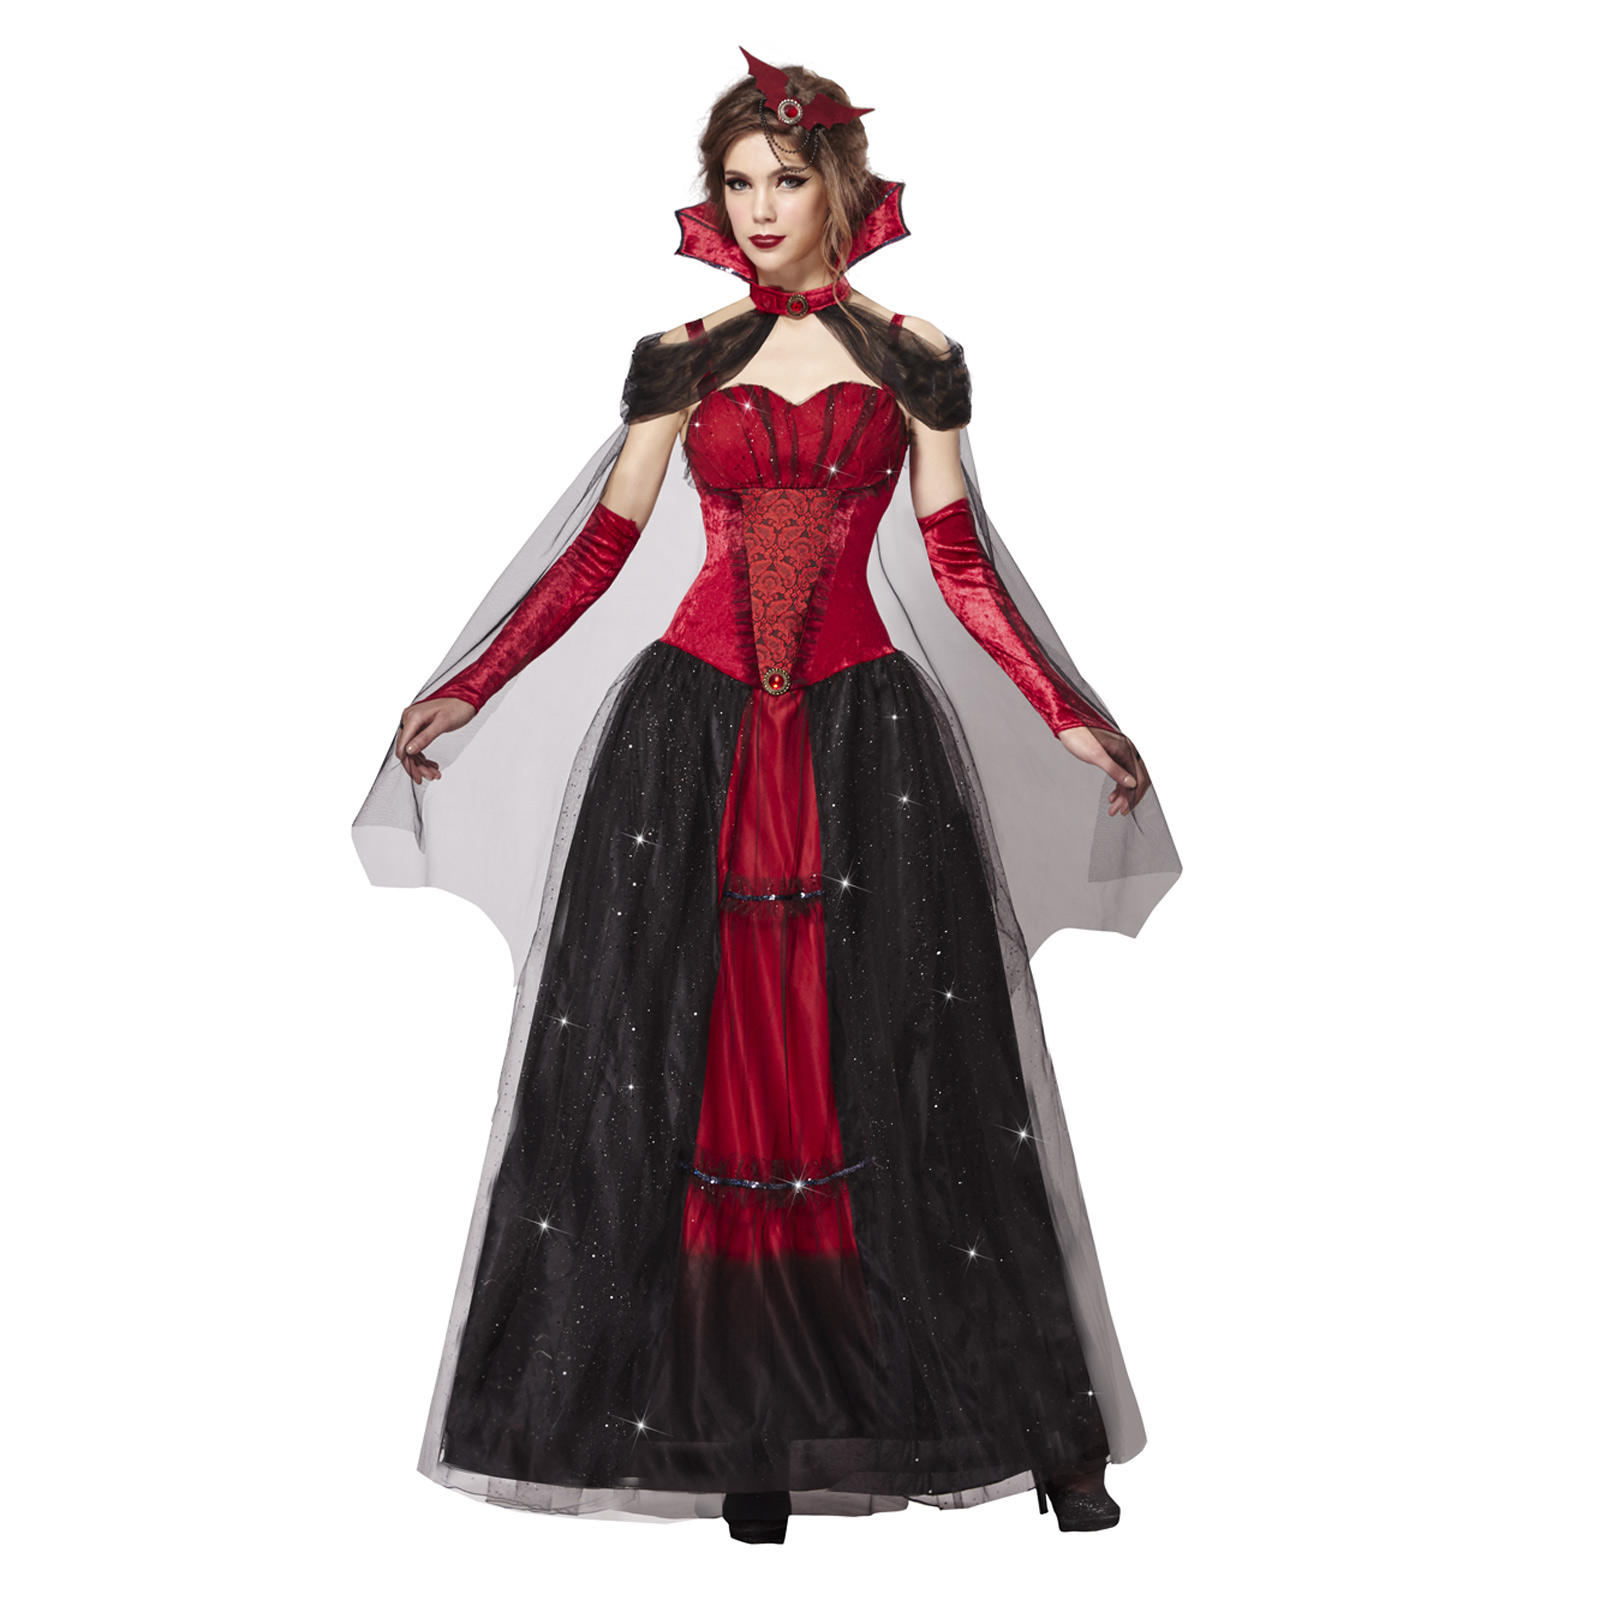 Clothes Shoes And Accessories Victorian Gothic Queen Dress Gown Renaissance Vampire Witch